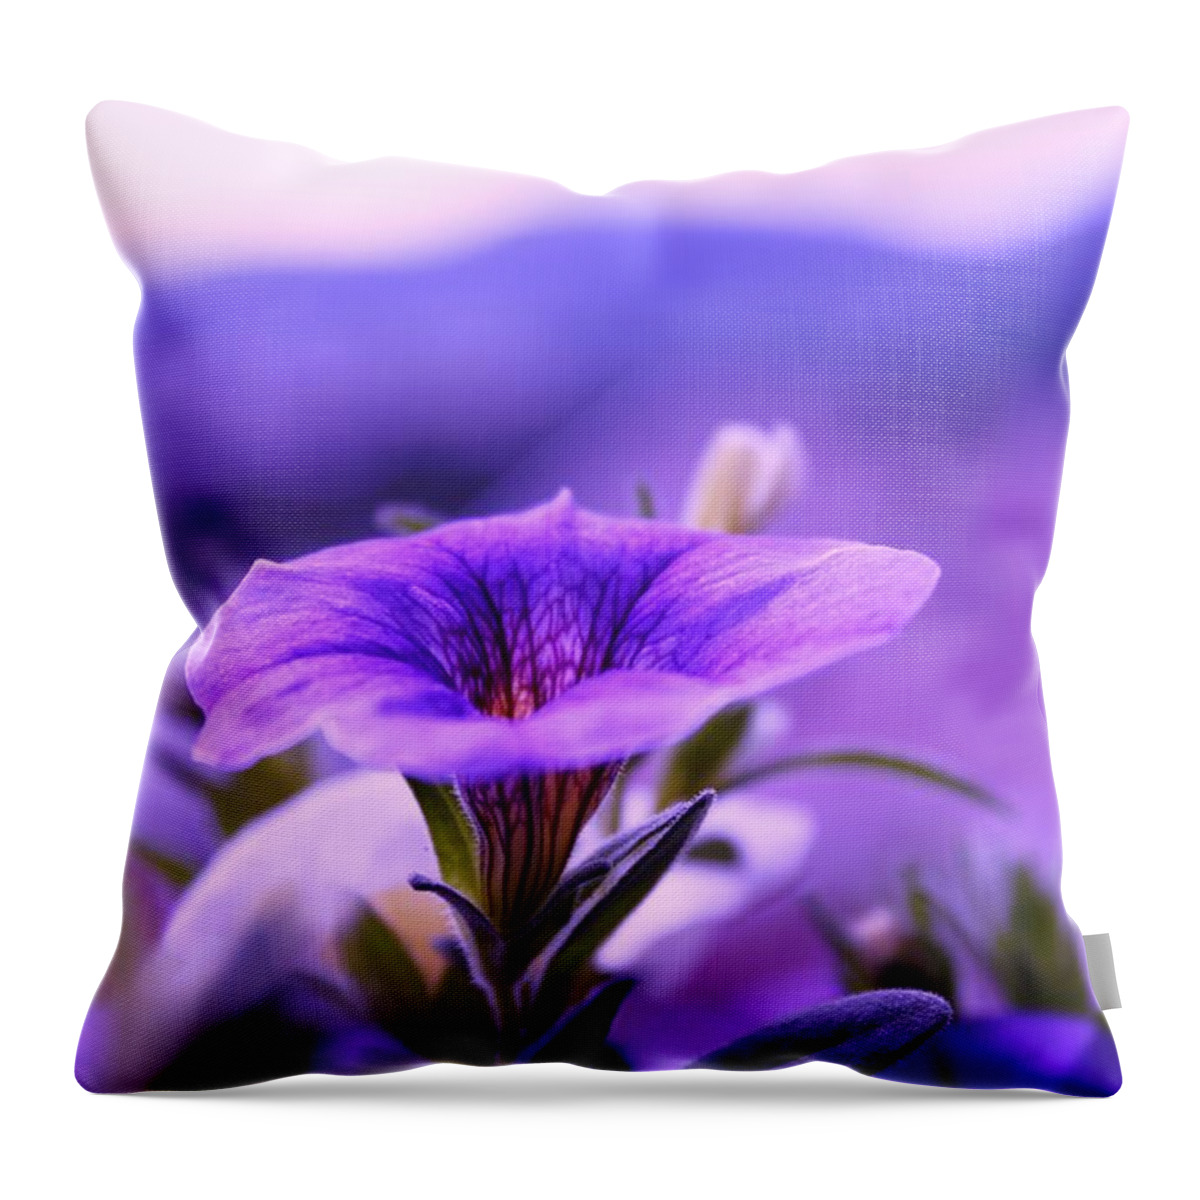 Floral Throw Pillow featuring the photograph One Evening With Million Bells by Yngve Alexandersson